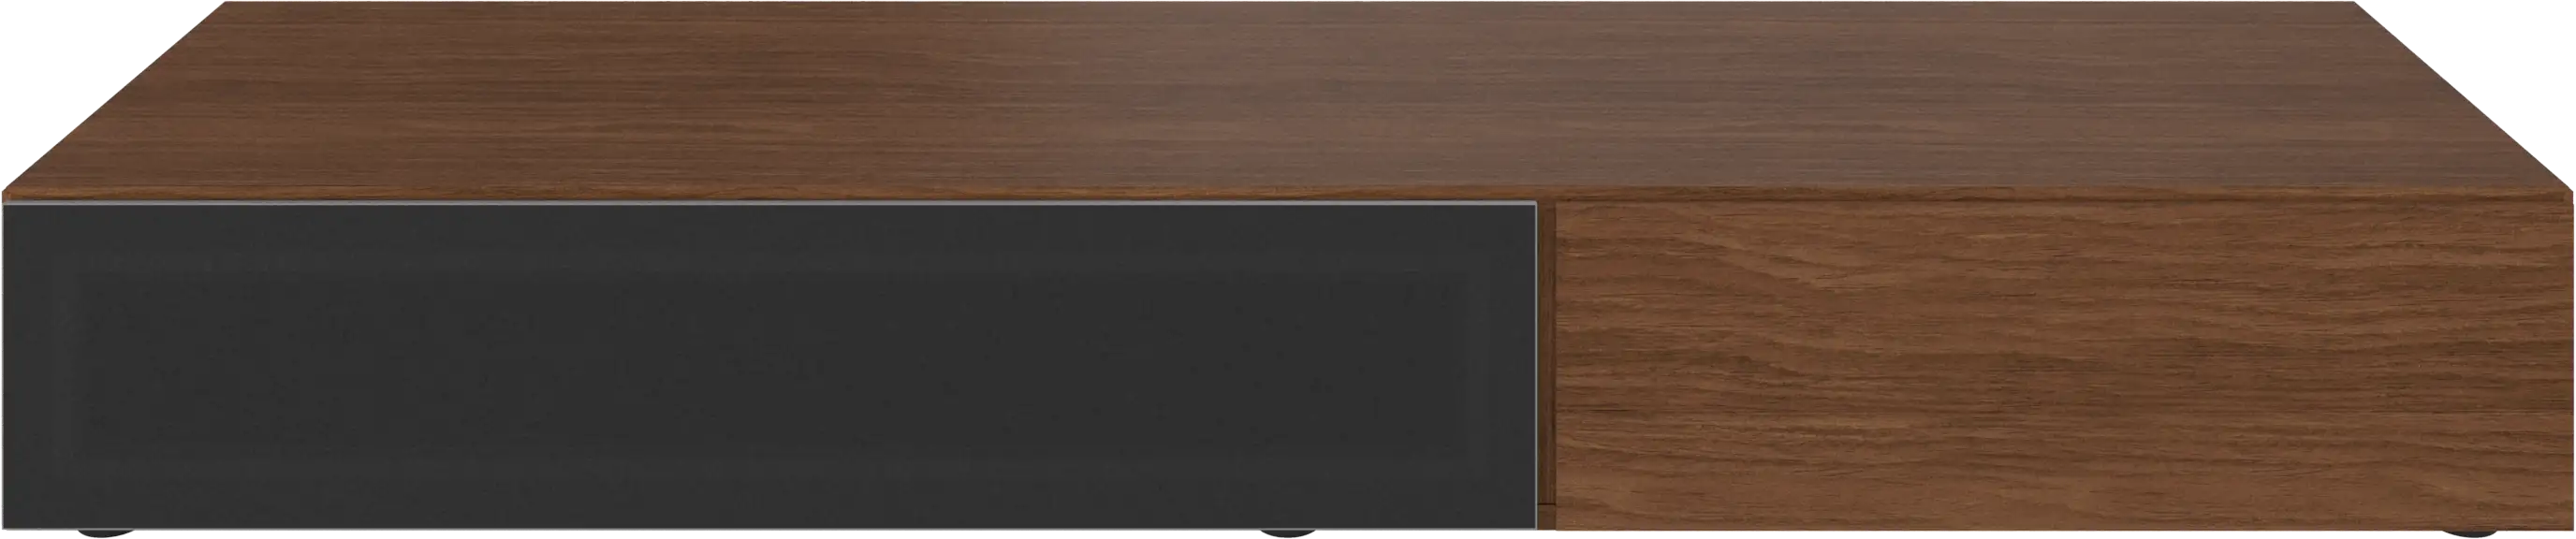 Lugano base cabinet with drawer and drop down door